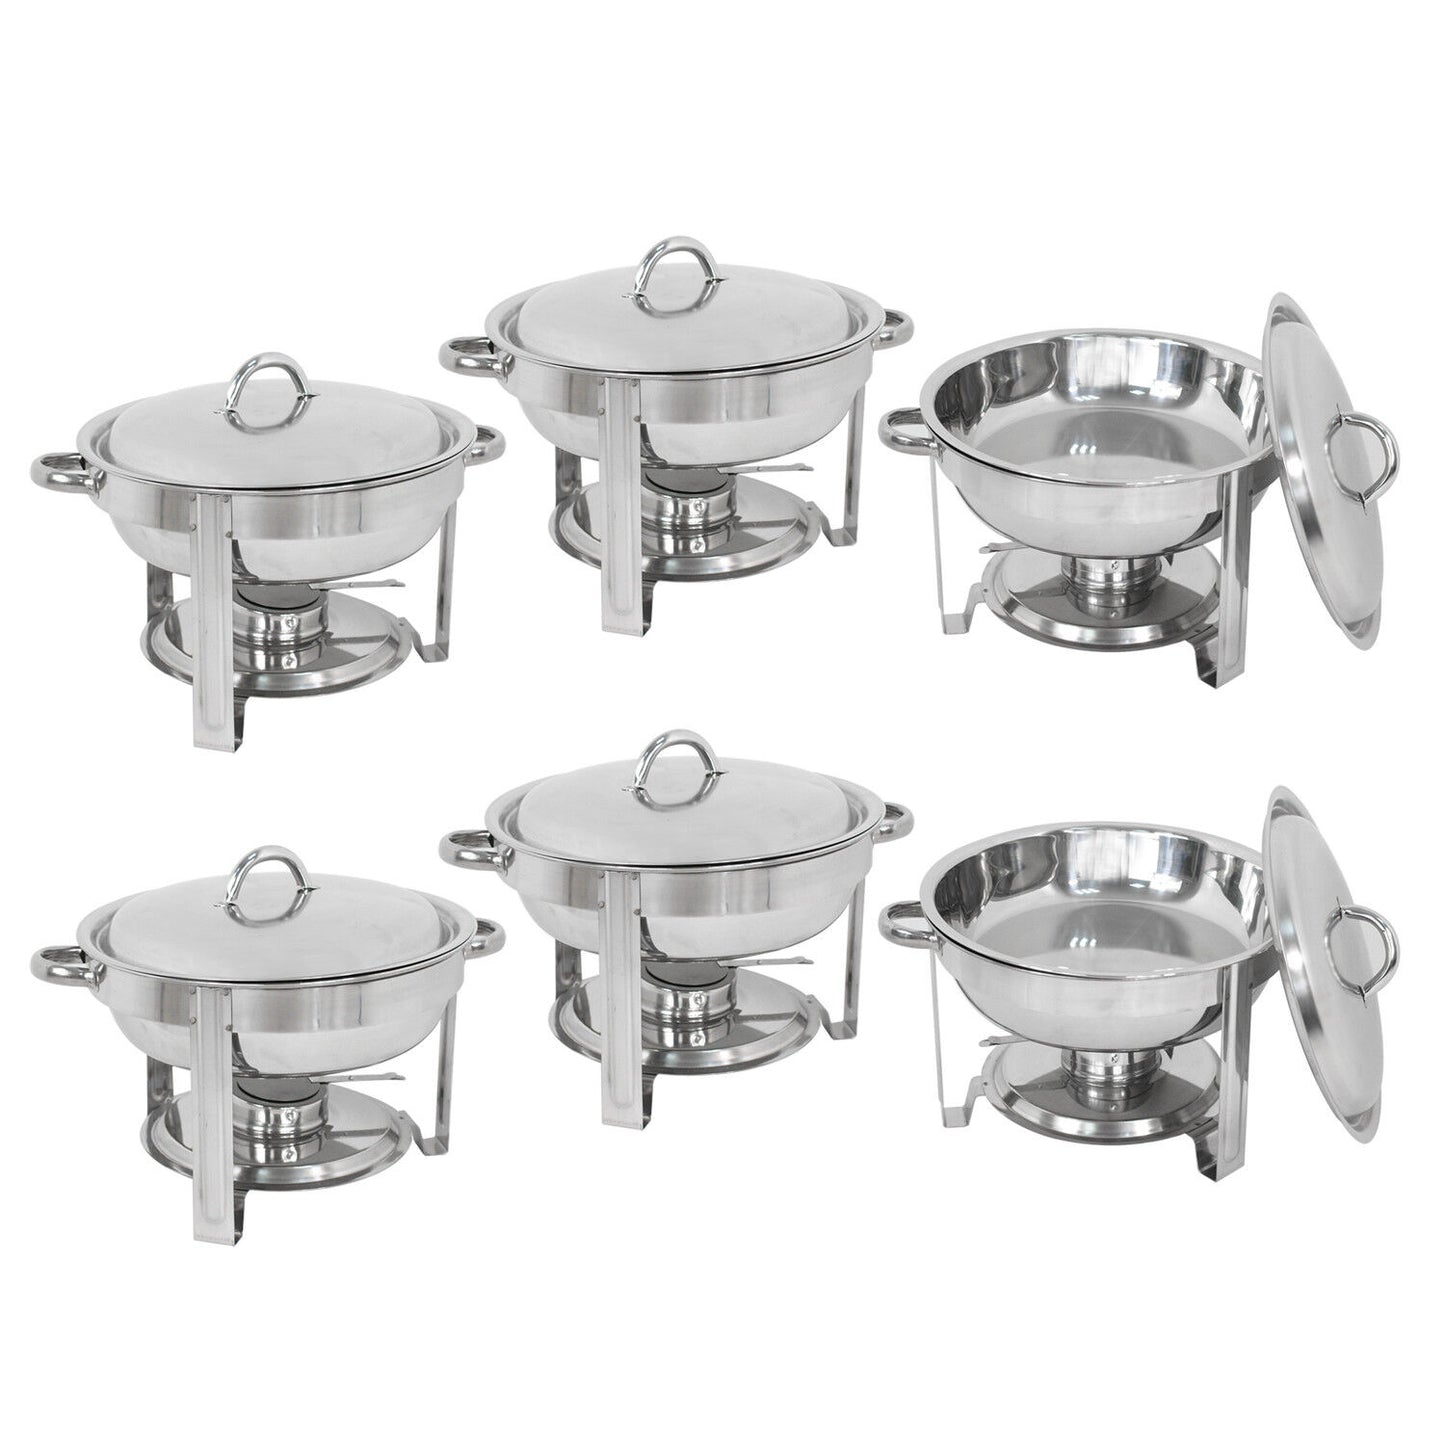 6-Pack Round Chafing Dish Buffet Chafer Warmer Set w/Lid 5 Quart,Stainless Steel